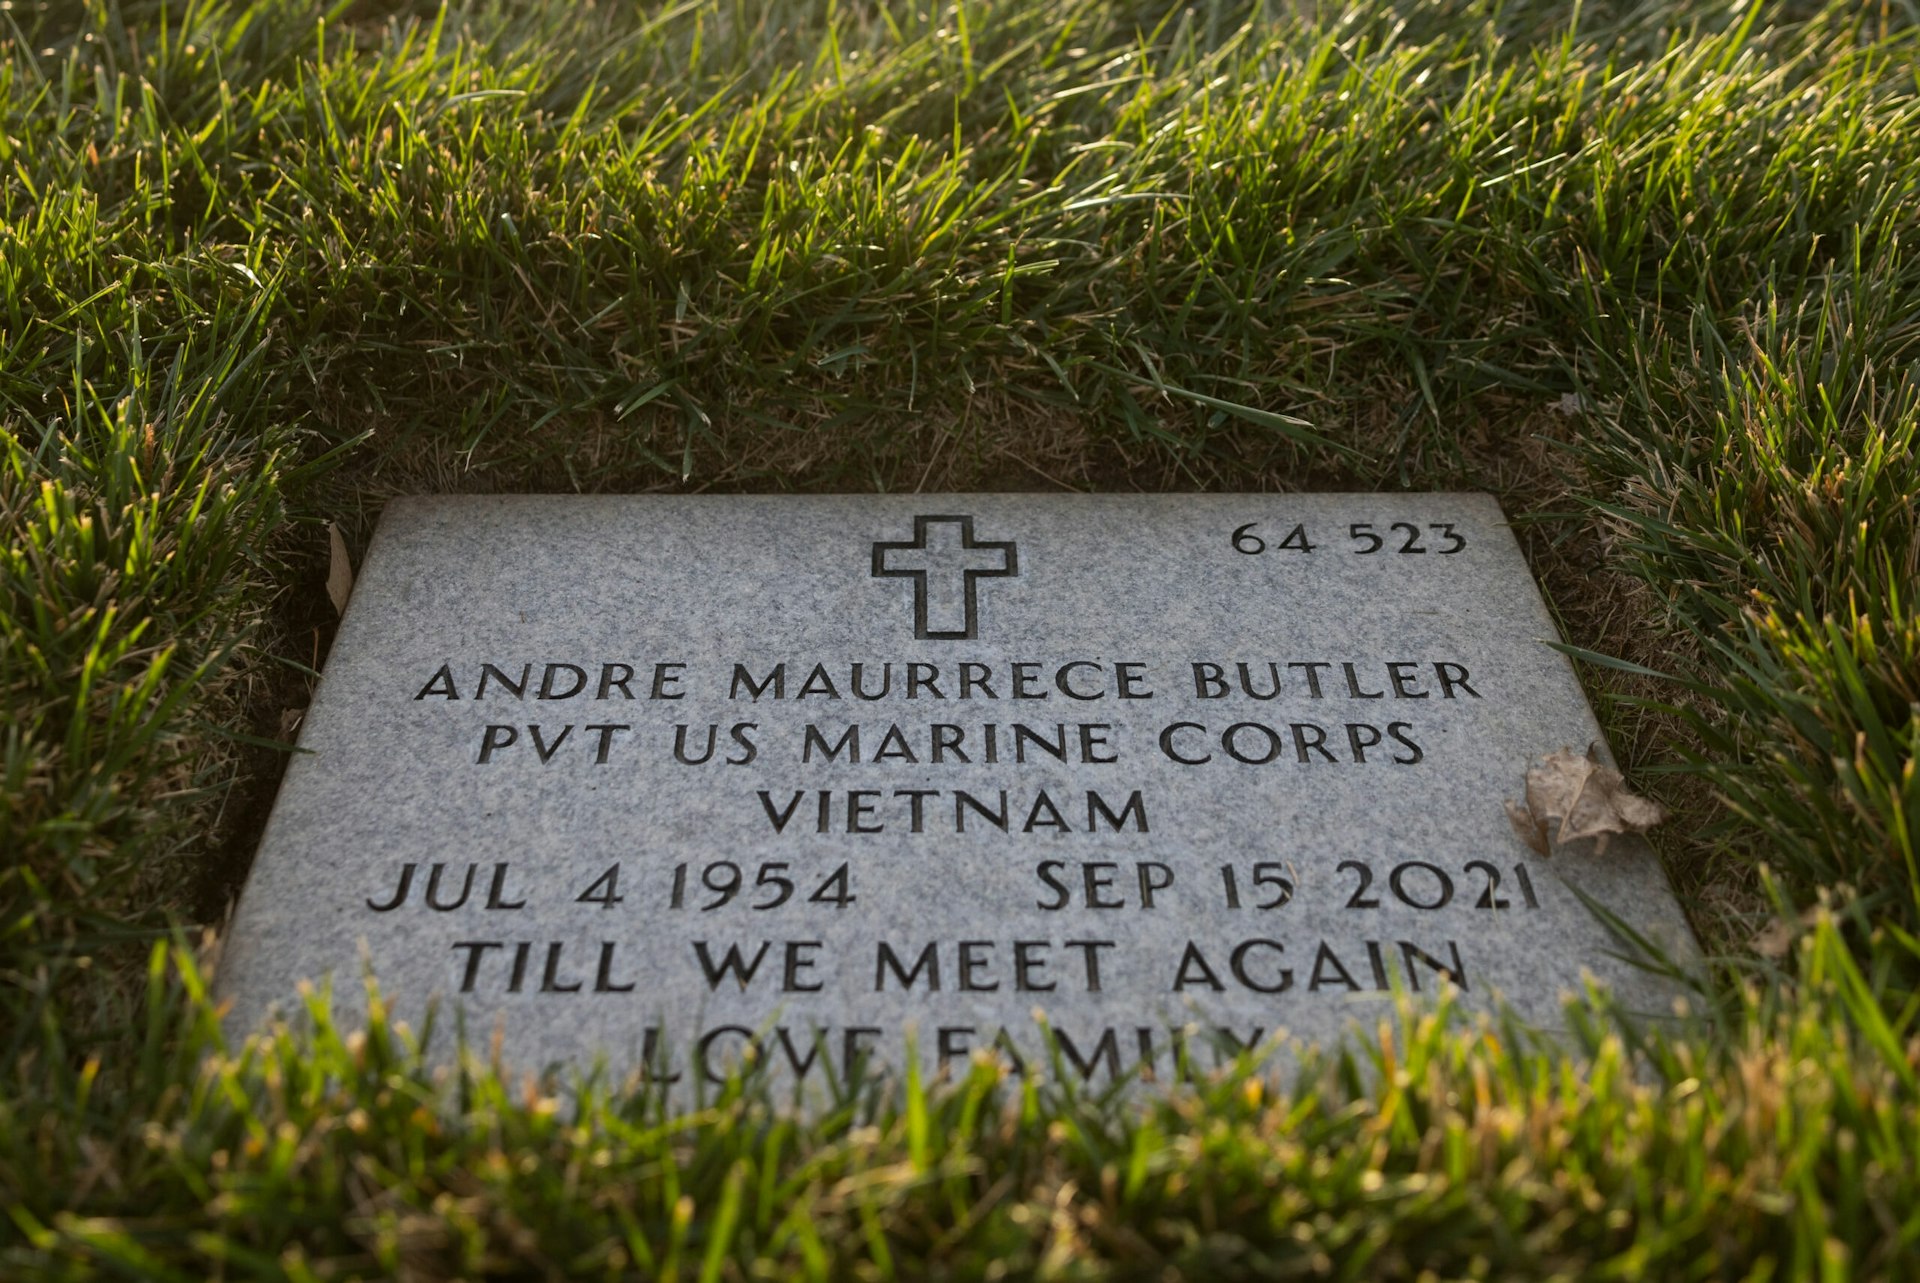 Andre's grave is at Riverside National Cemetery. His middle name, Maurice, is misspelled "Maurrece."